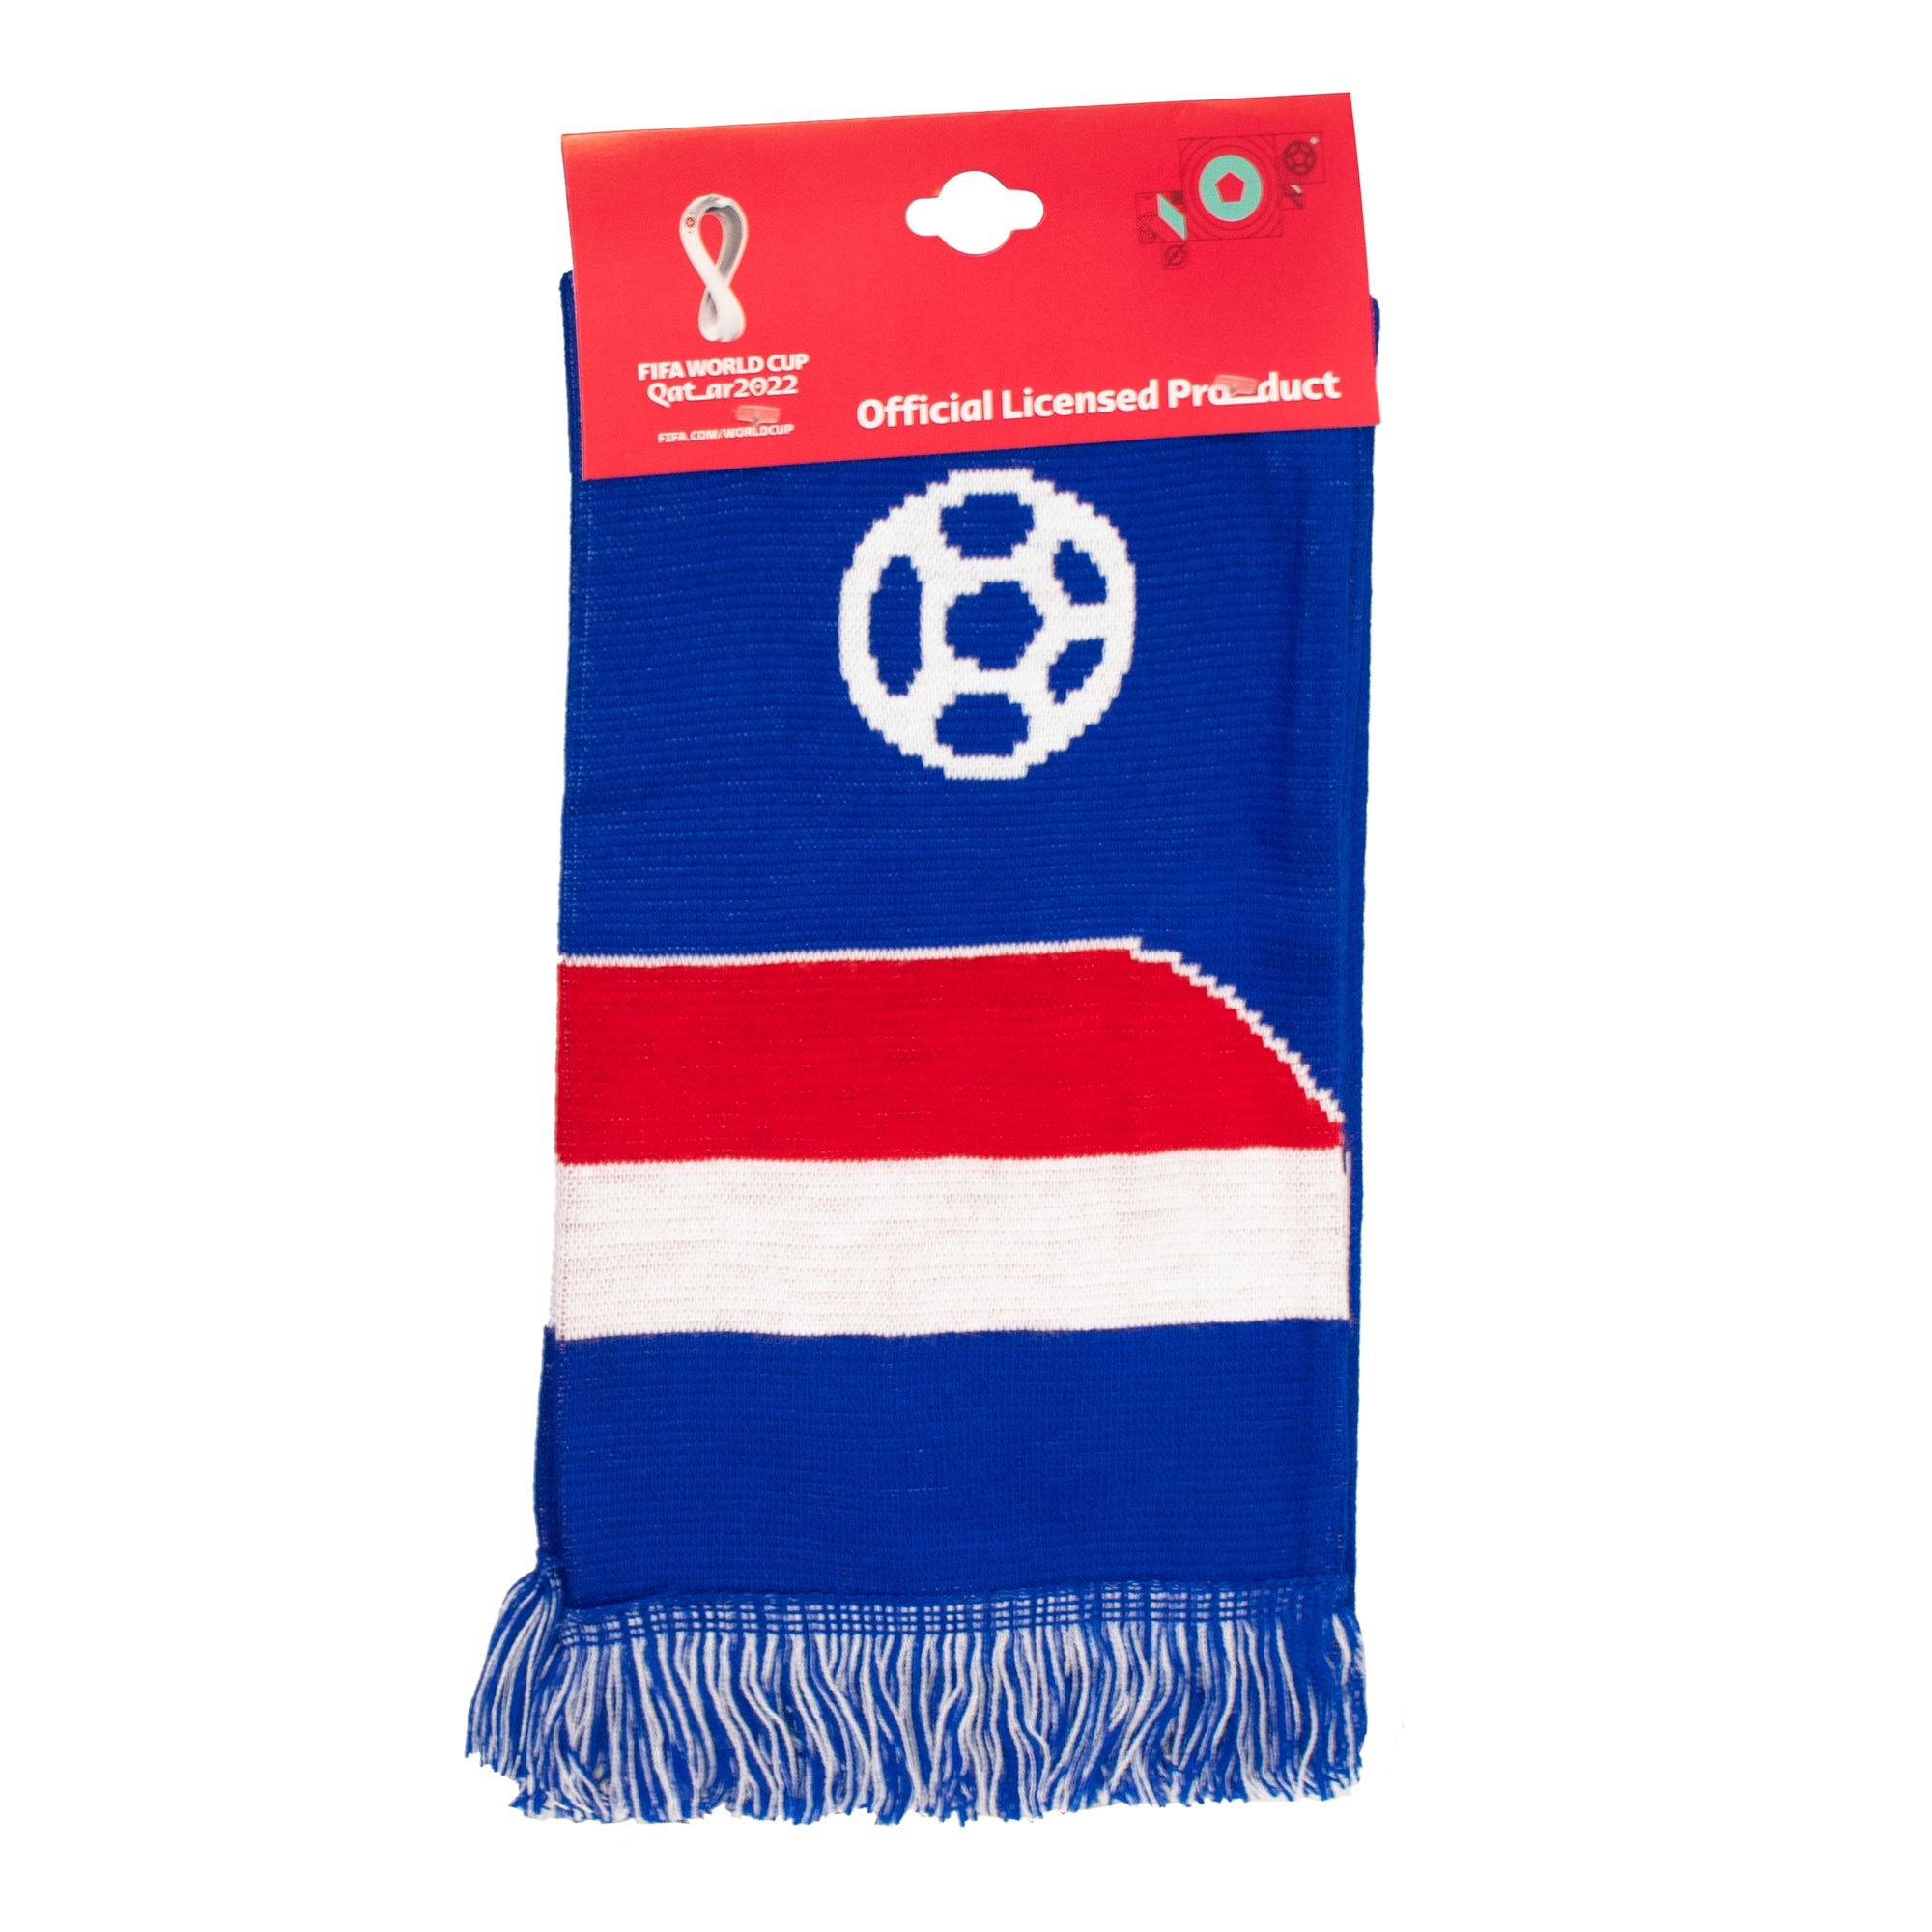 scarf-france-front-worldcup-productimage.jpg